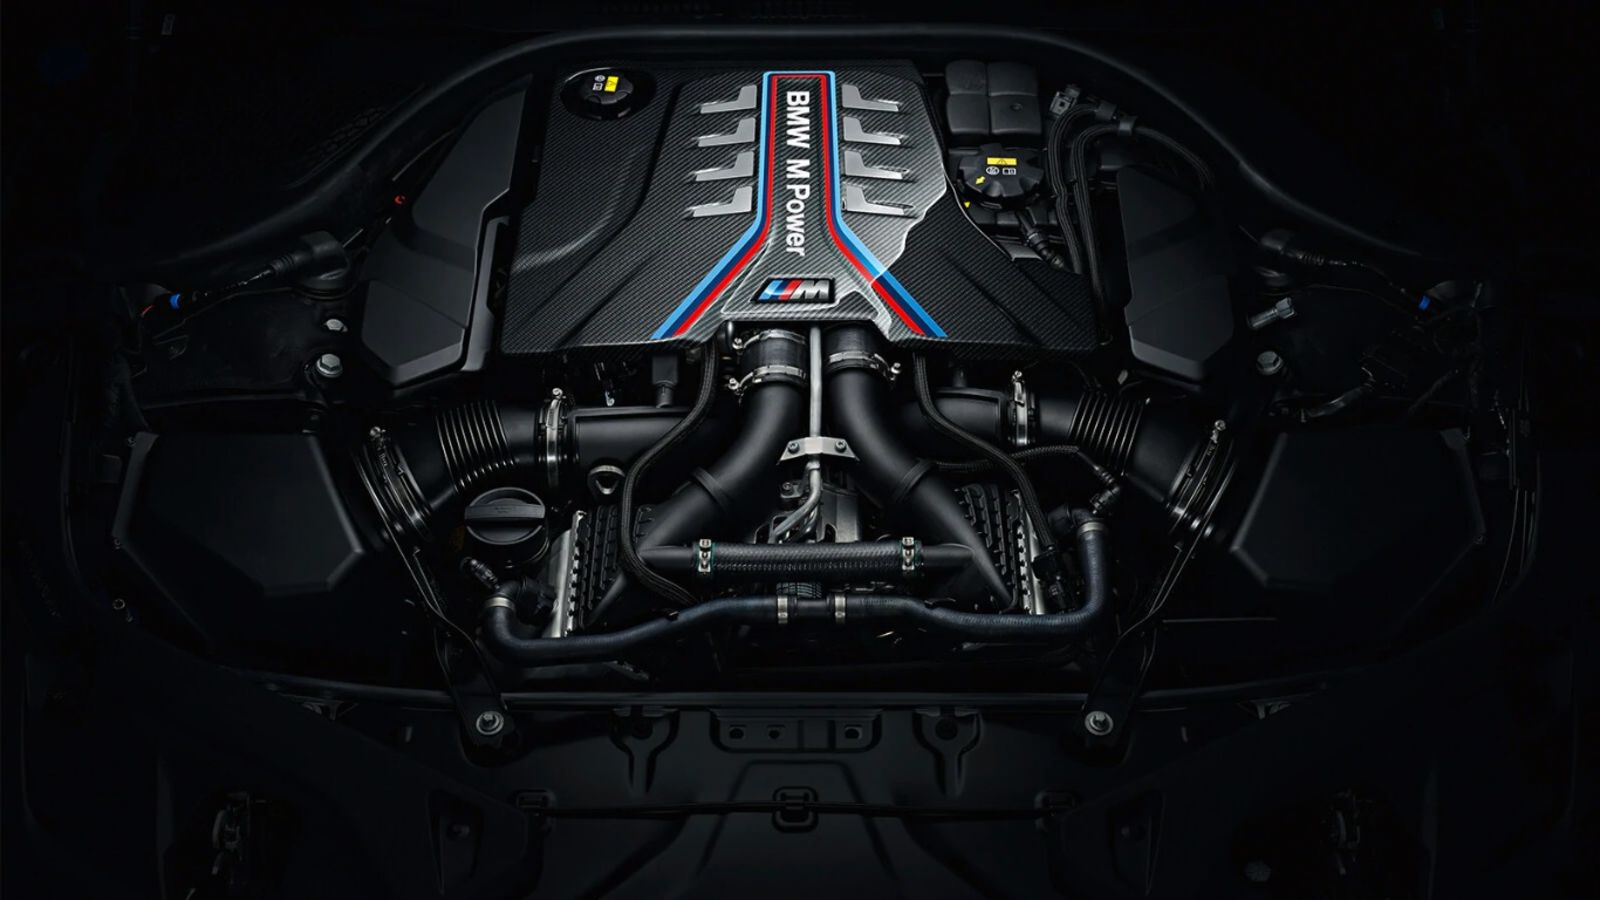 BMW claims this is their most powerful engine they’ve ever produced